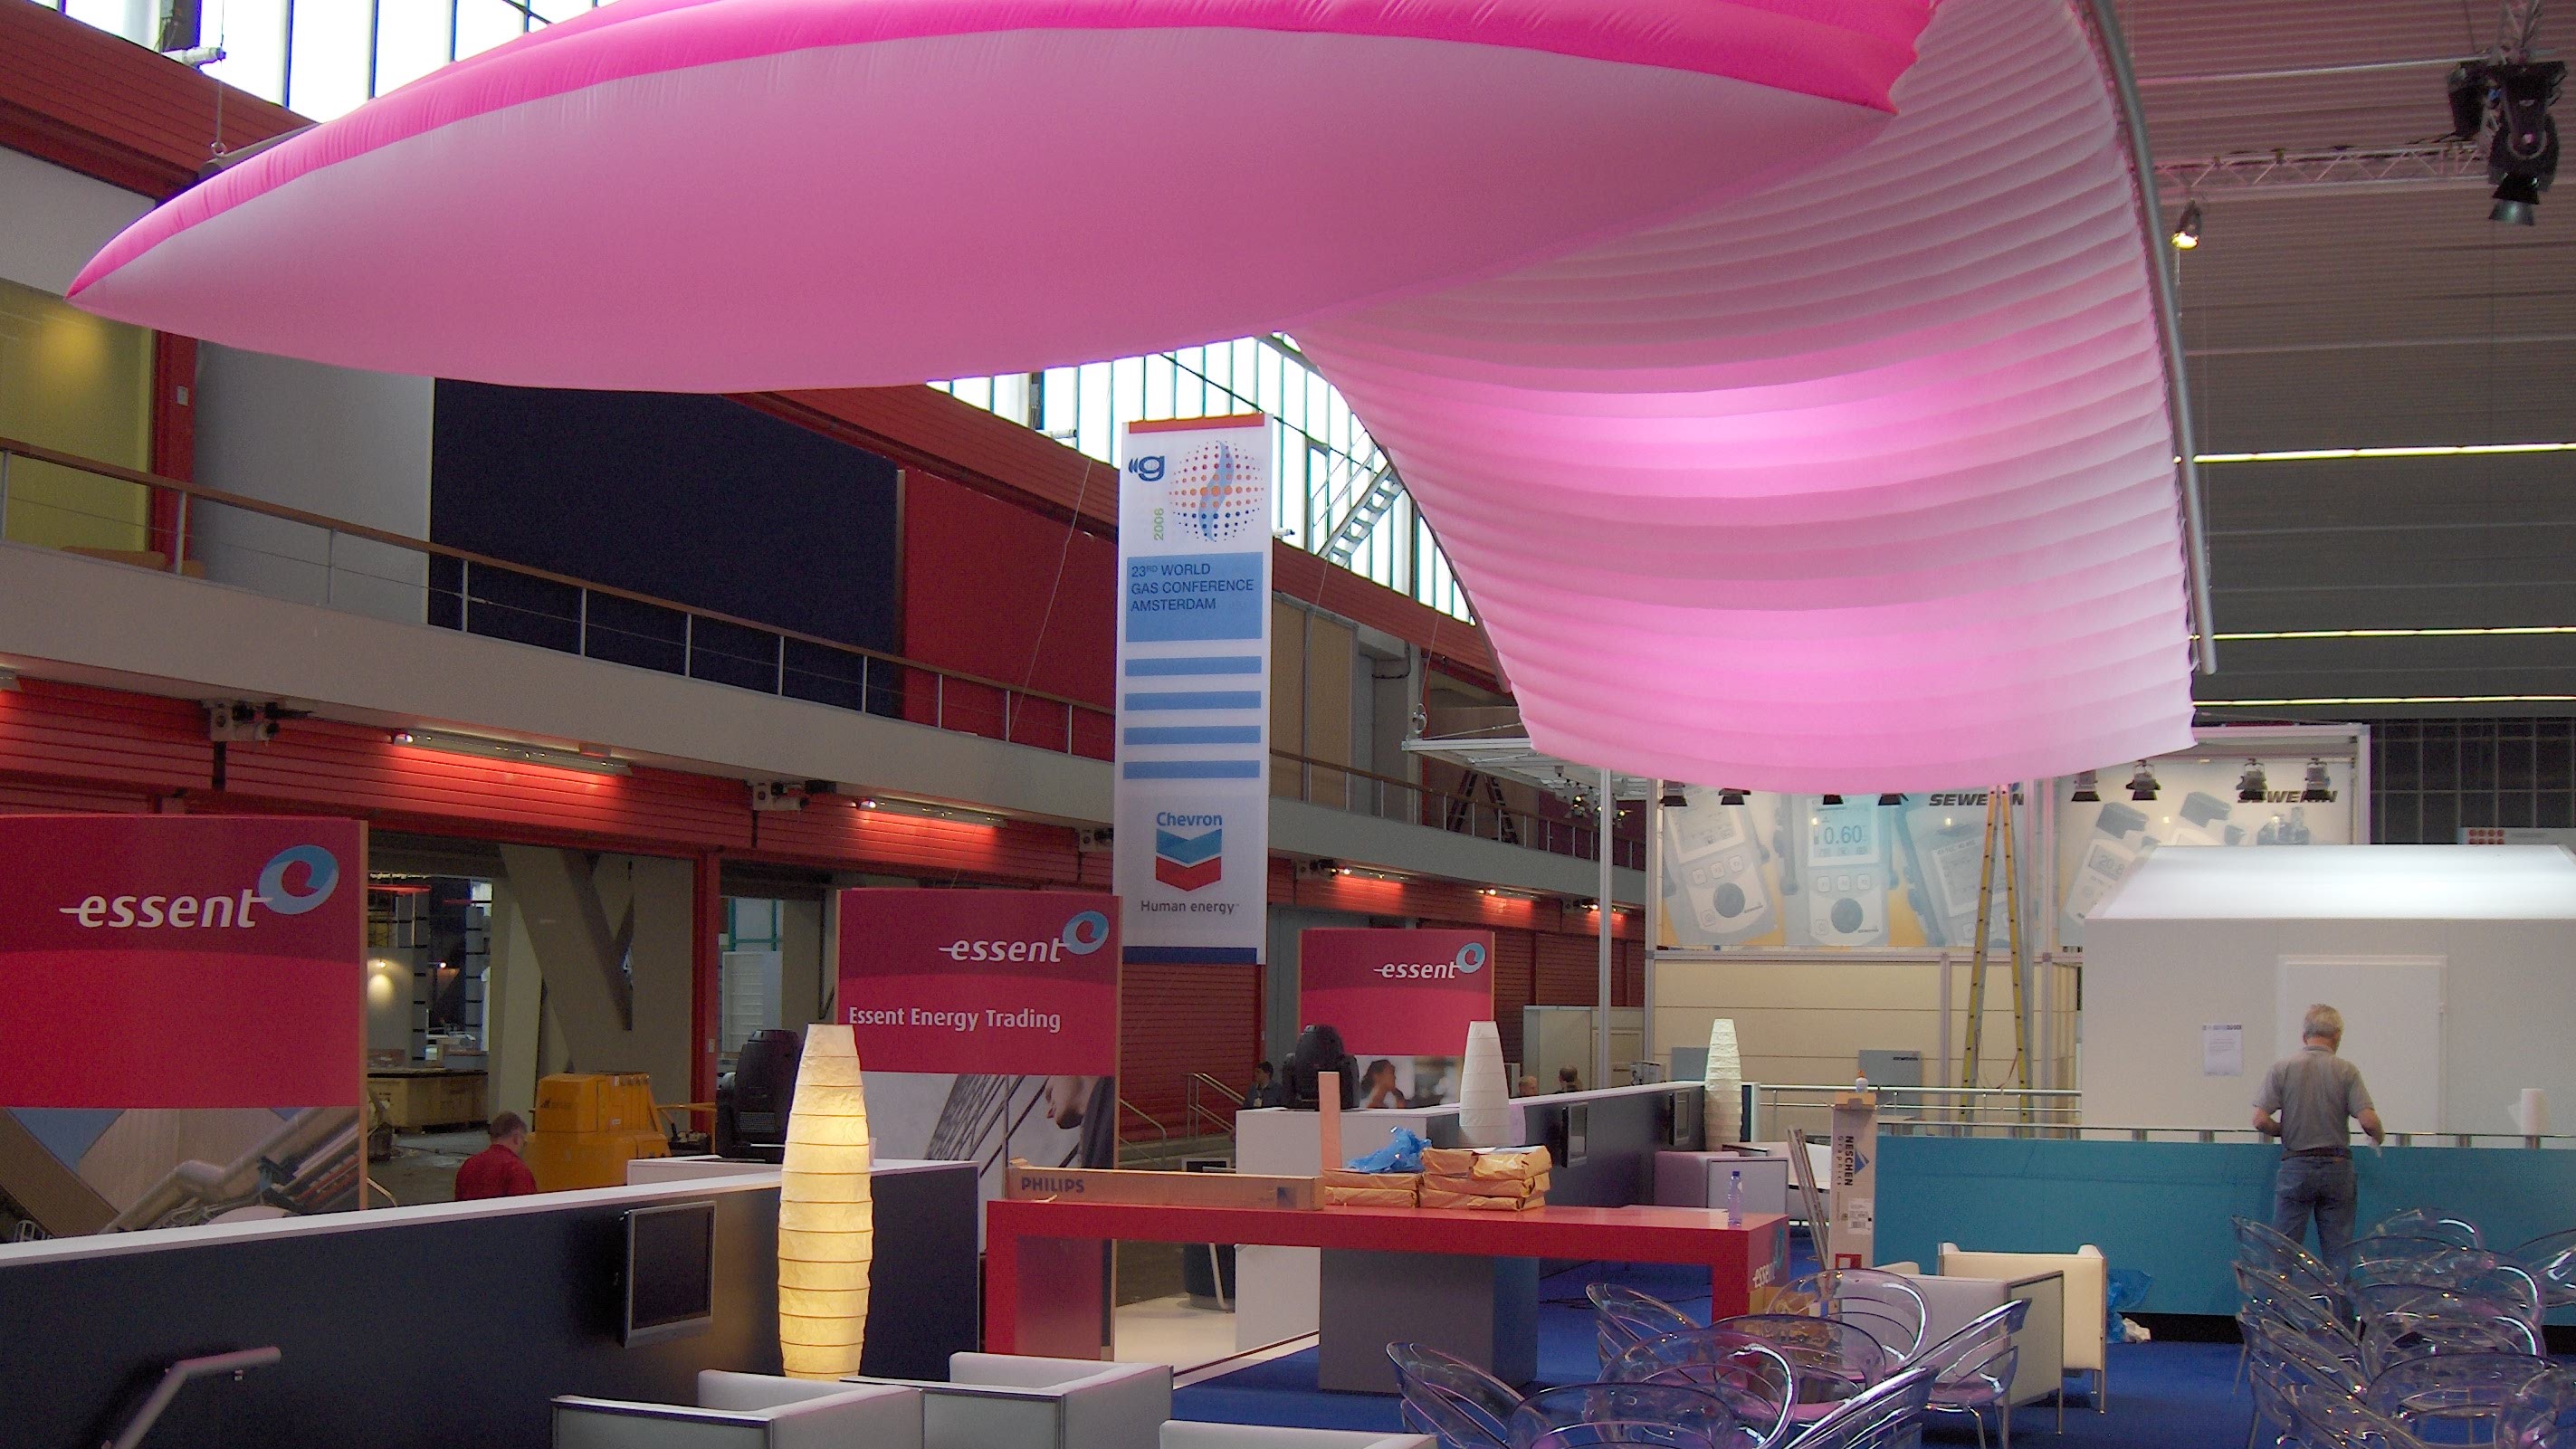 essent - beurs - publi air - inflatable - roze - stand - aankleding